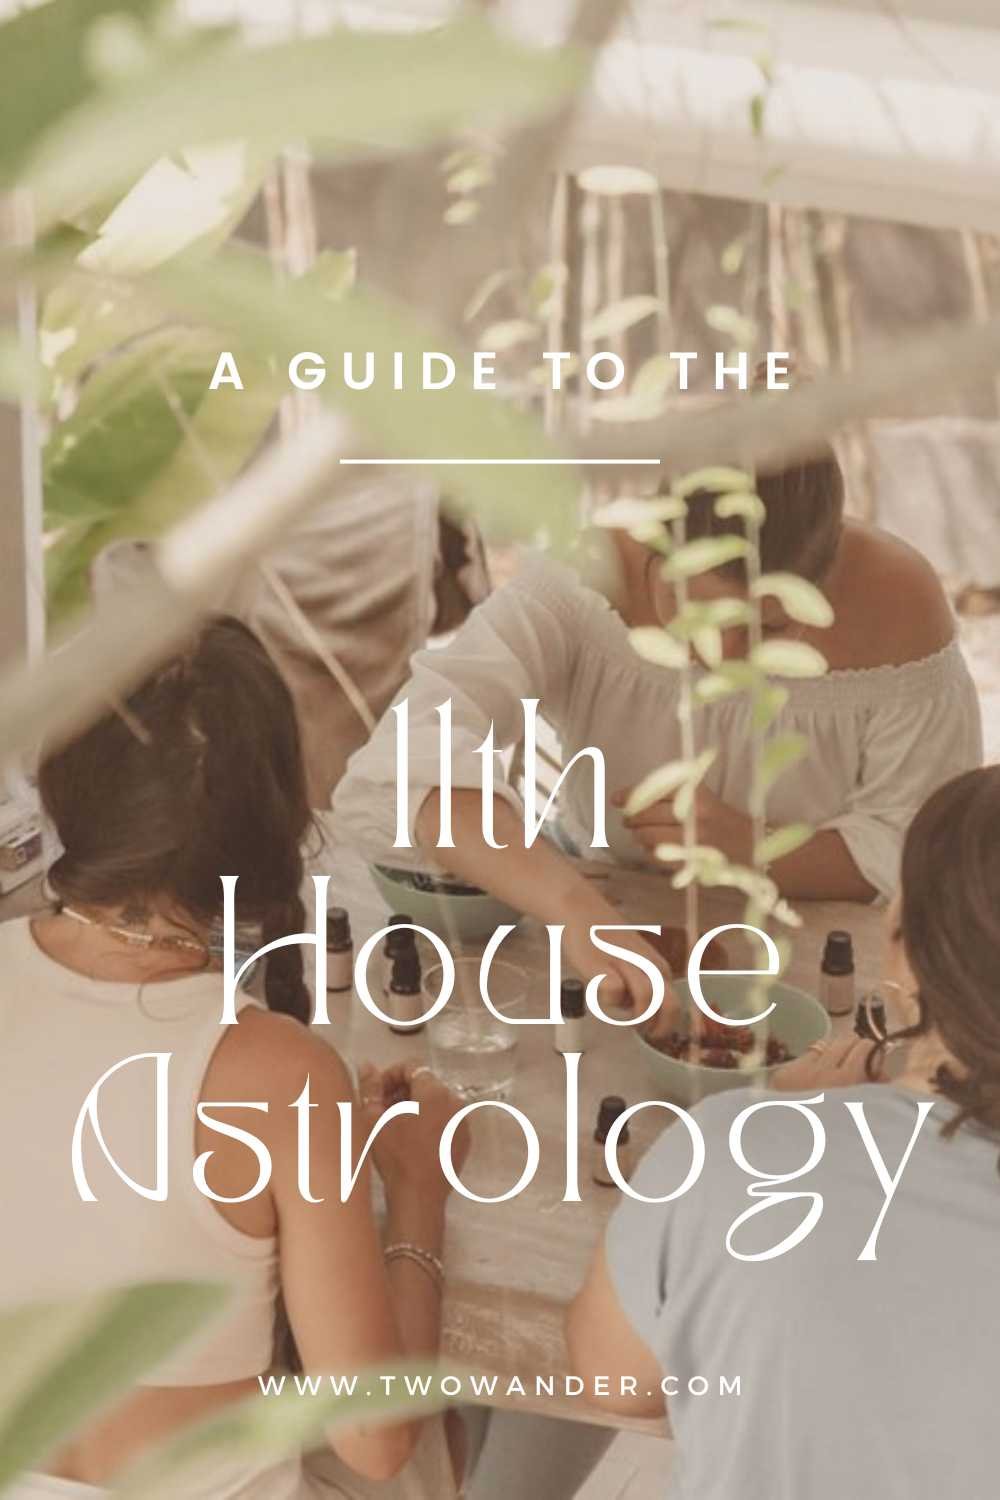 two-wander-a-guide-to-the-11th-house-astrology